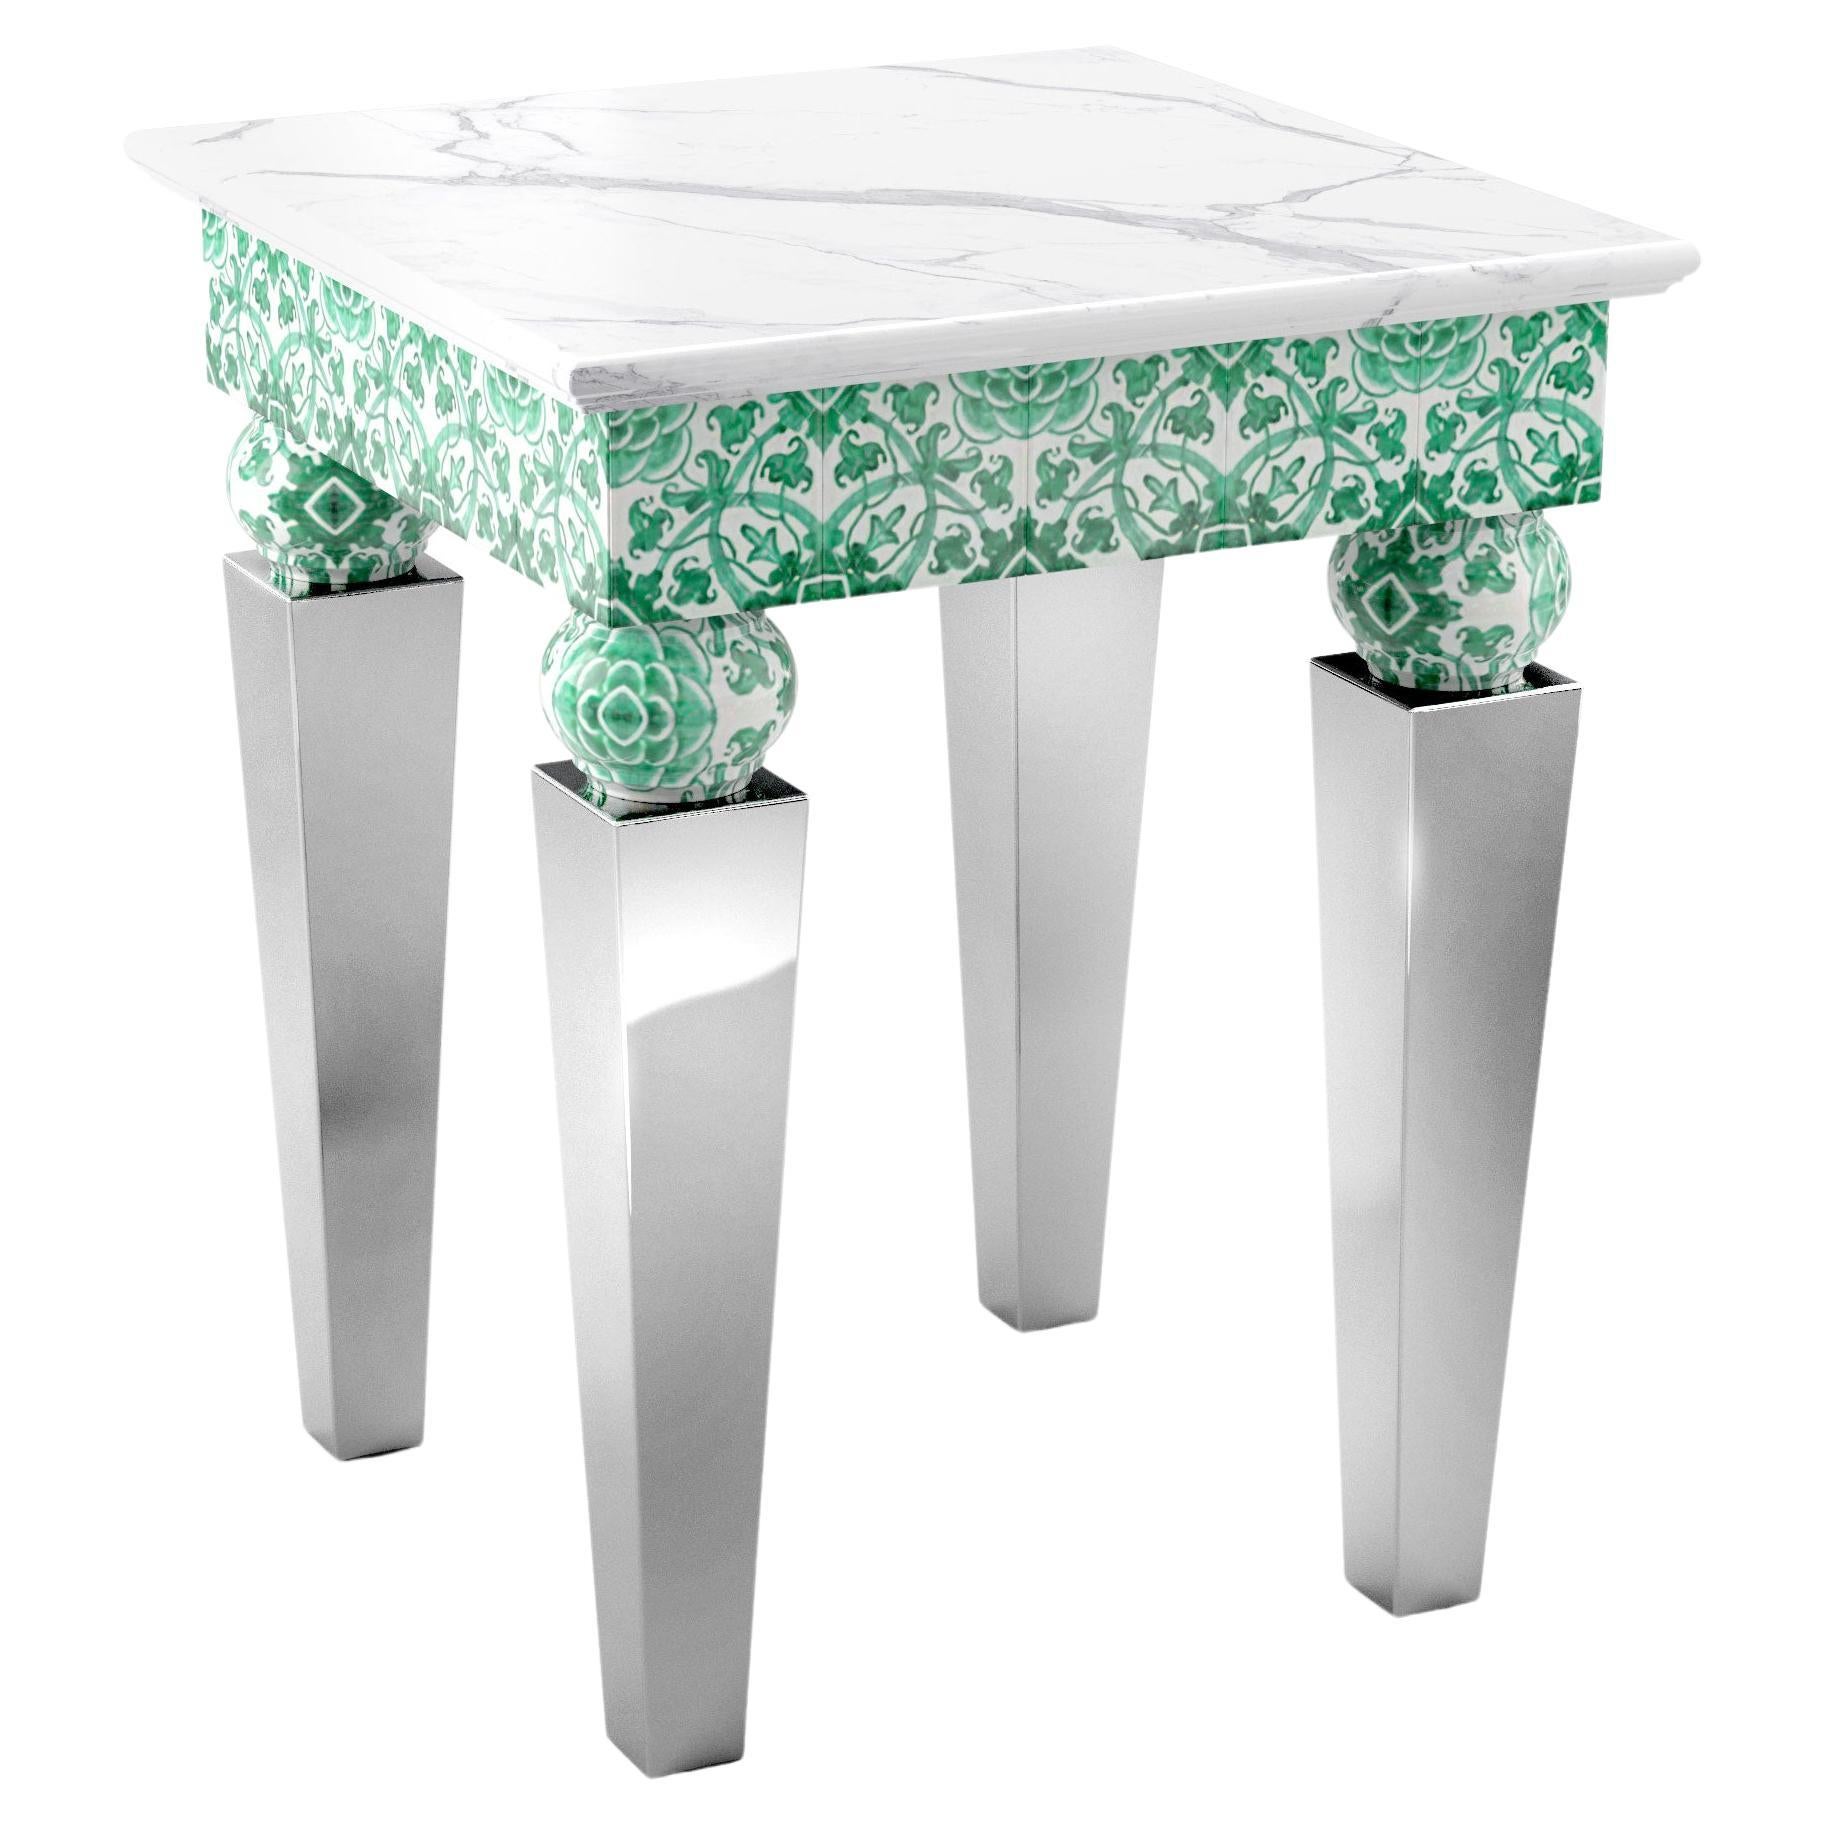 Side Table White Marble Top Mirror Steel Legs Green Majolica Tiles, Also Outdoor For Sale